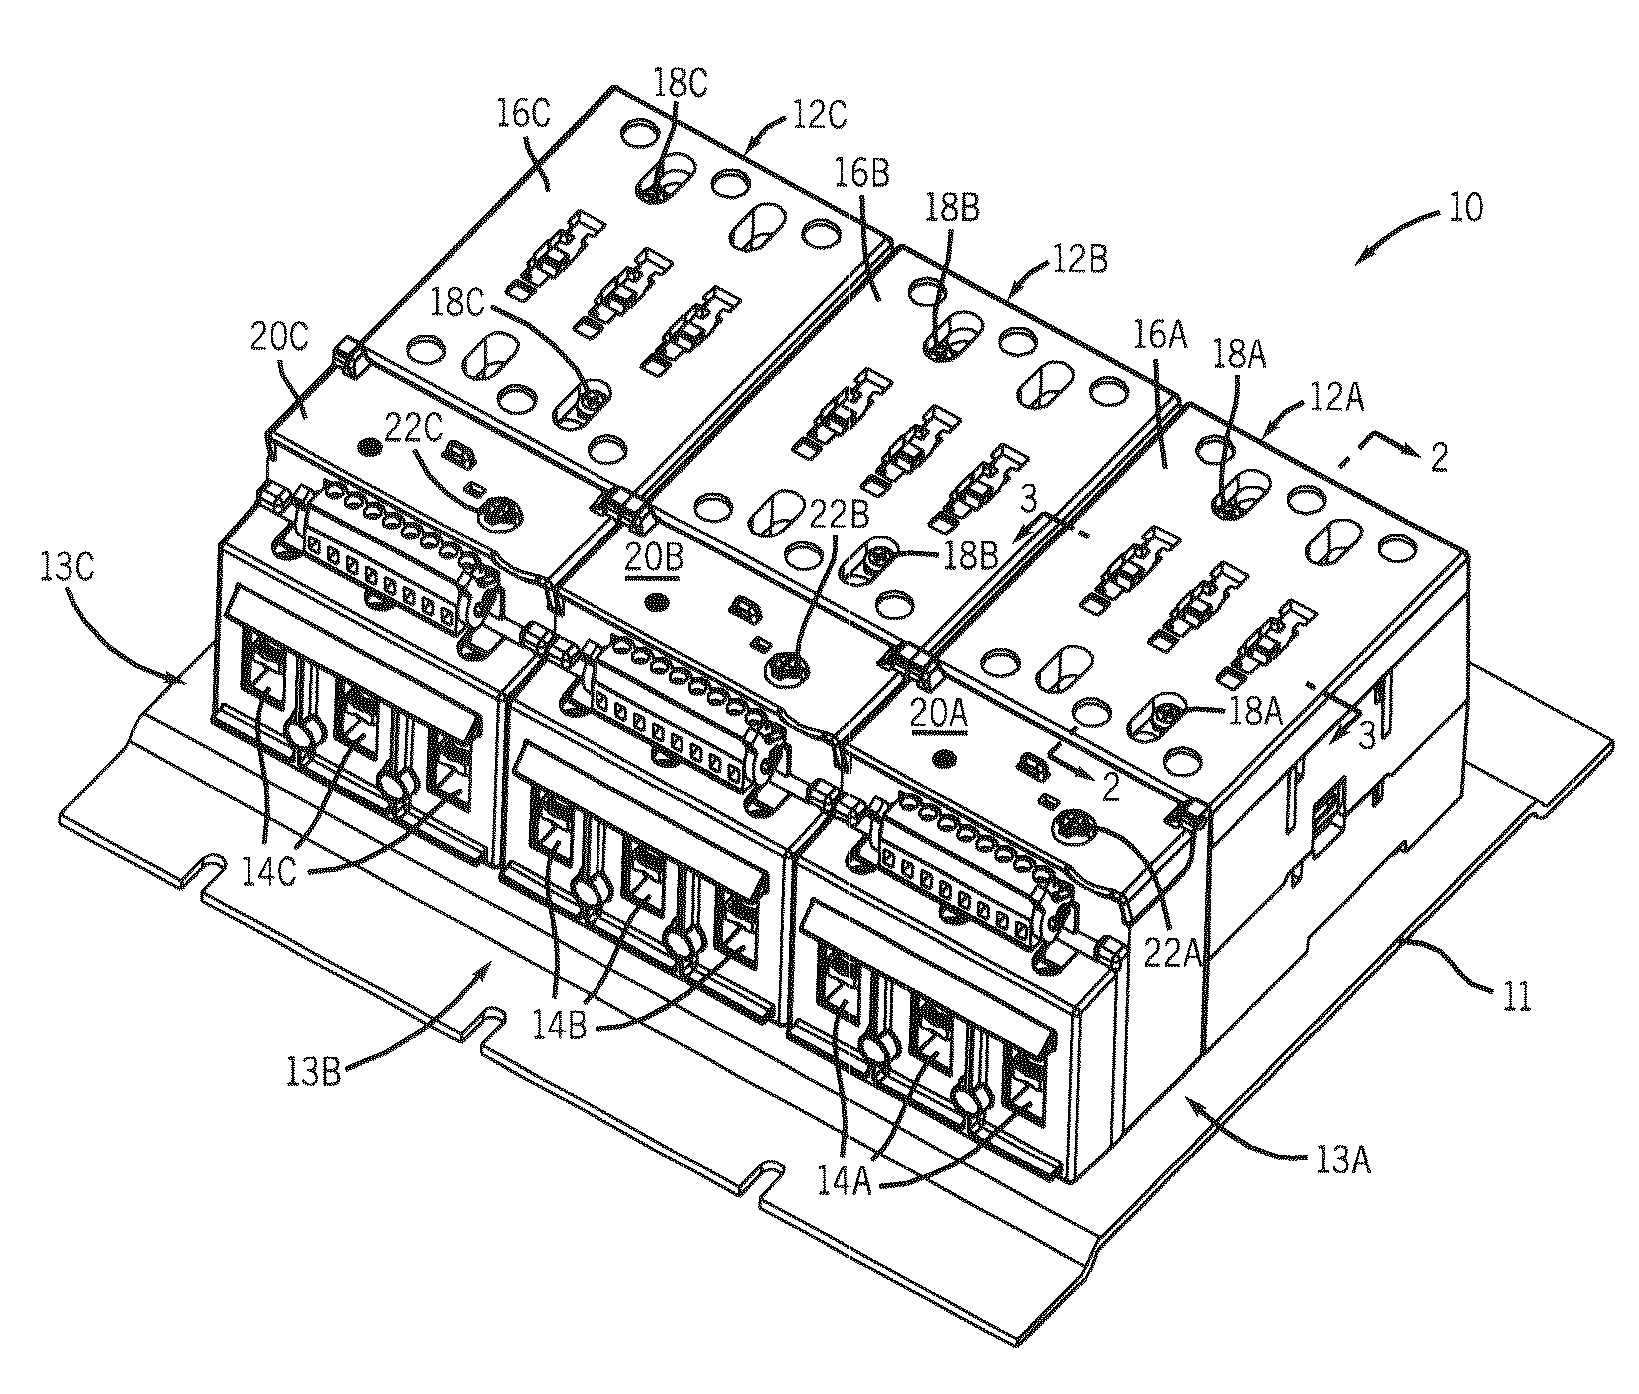 Method and apparatus to independently control contactors in a multiple contactor configuration